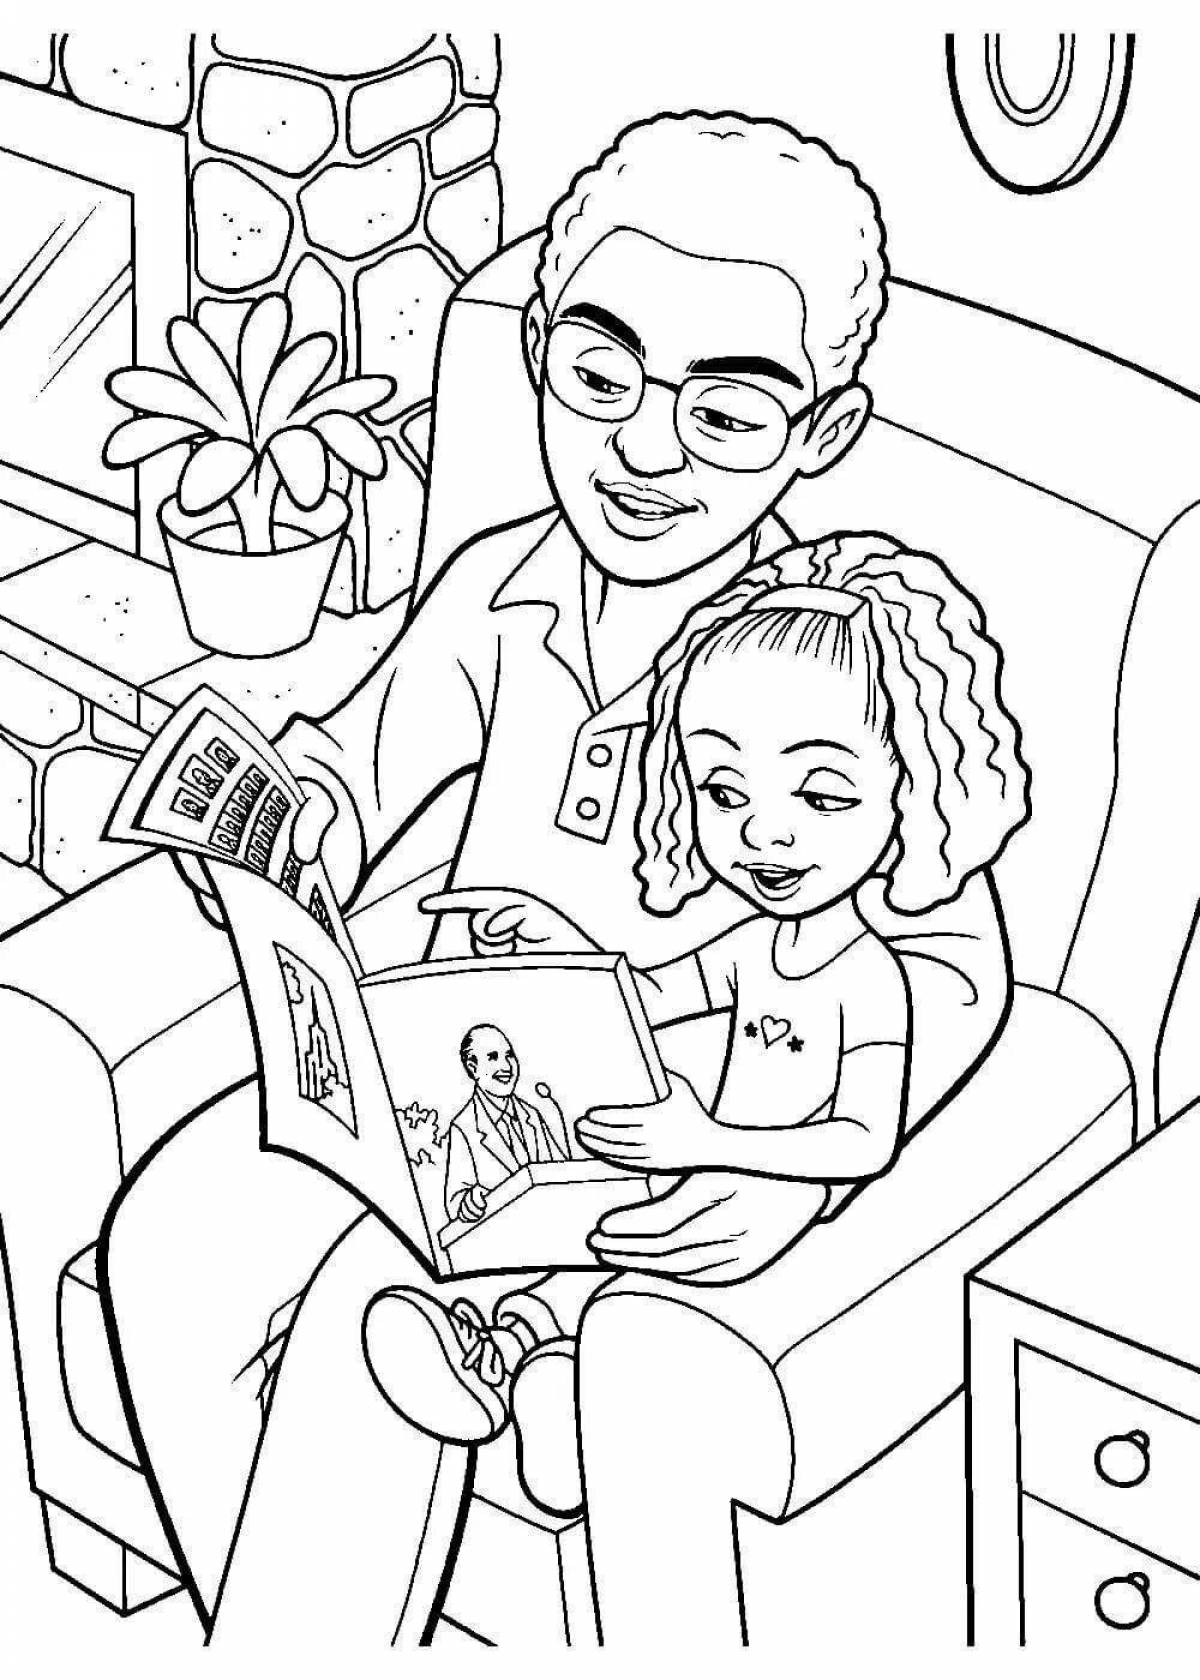 Adorable coloring game for dad and daughter